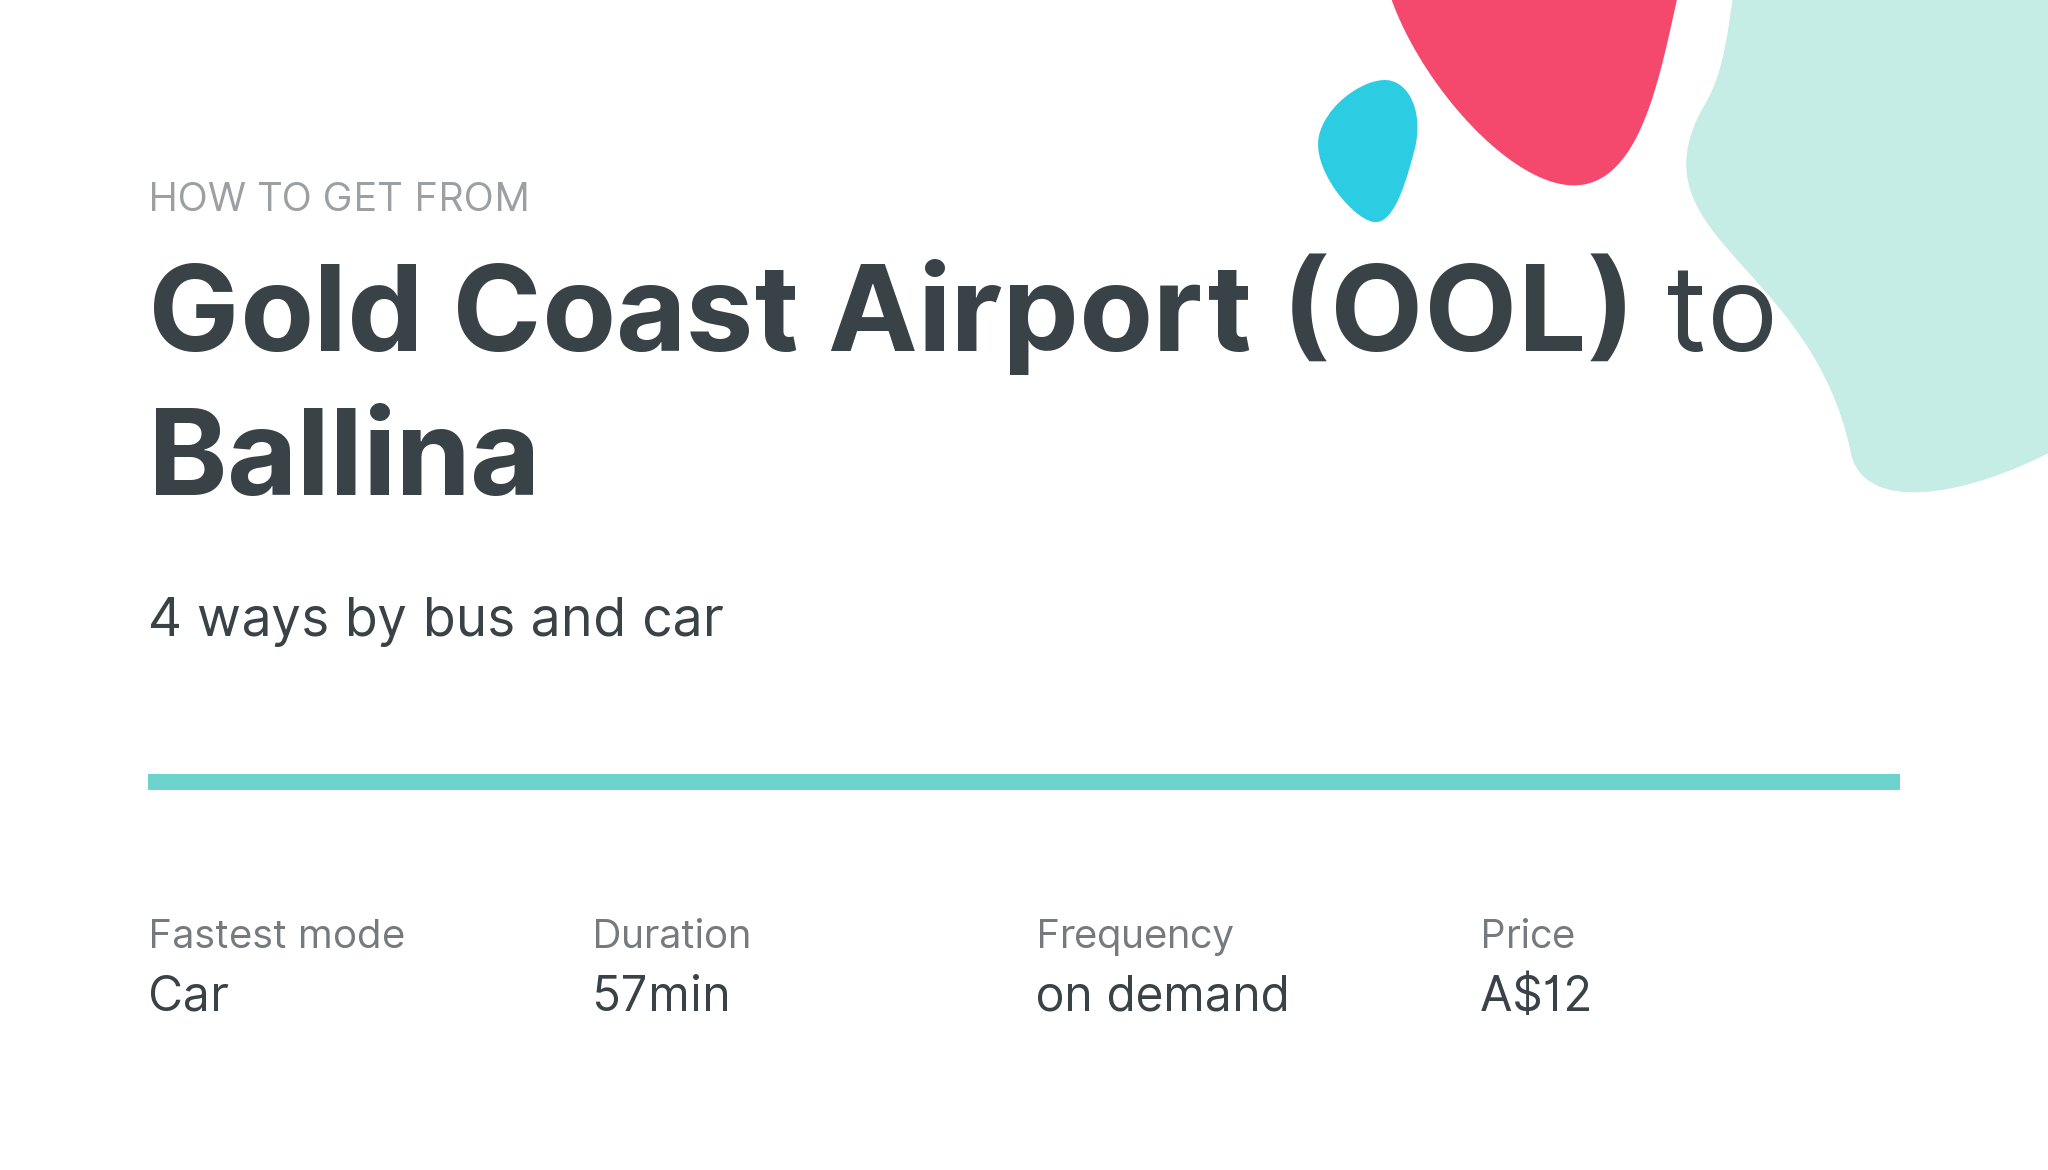 How do I get from Gold Coast Airport (OOL) to Ballina